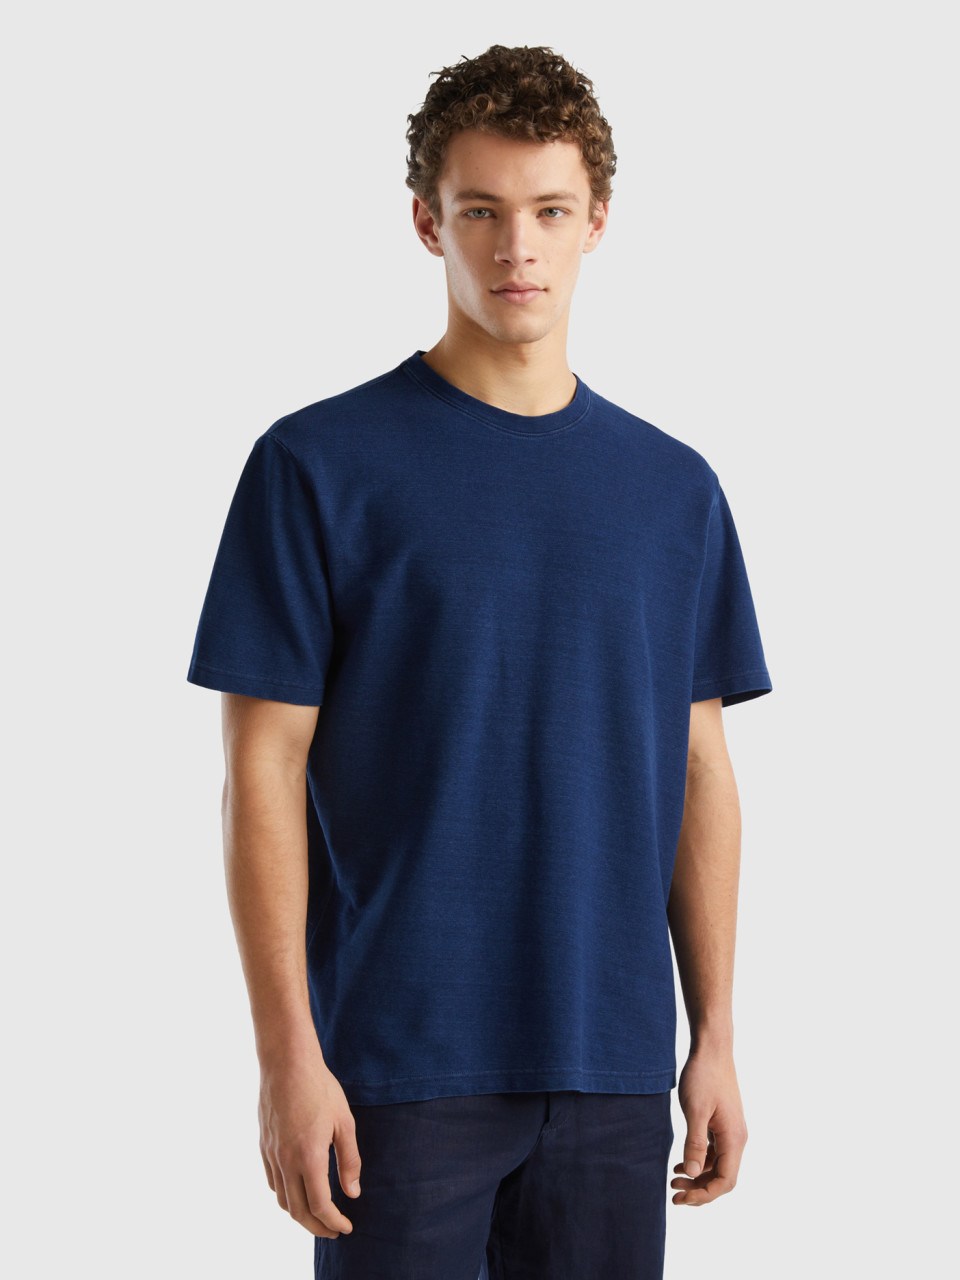 Benetton, T-shirt Relaxed Fit 100% Cotone, Blu, Uomo